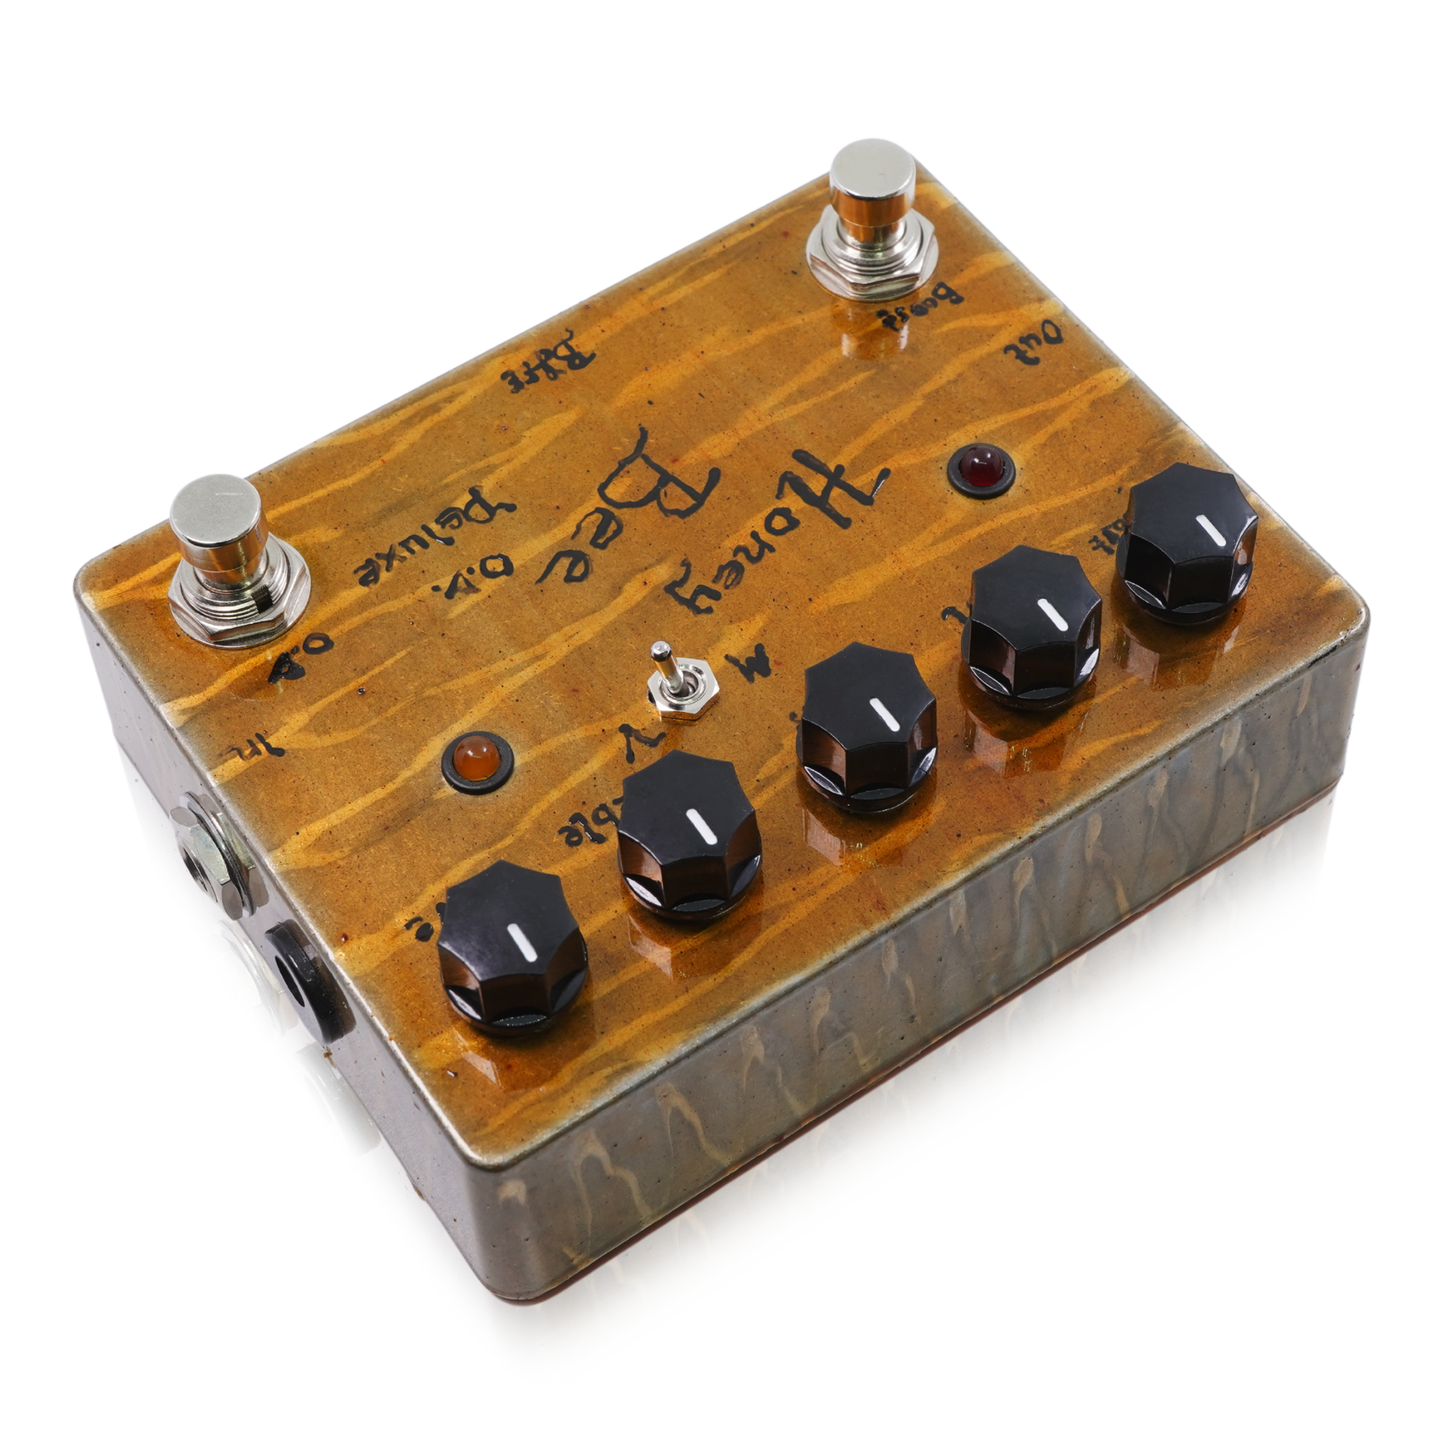 BJFE　Honey Bee Deluxe with Toggle Switch【予約商品】